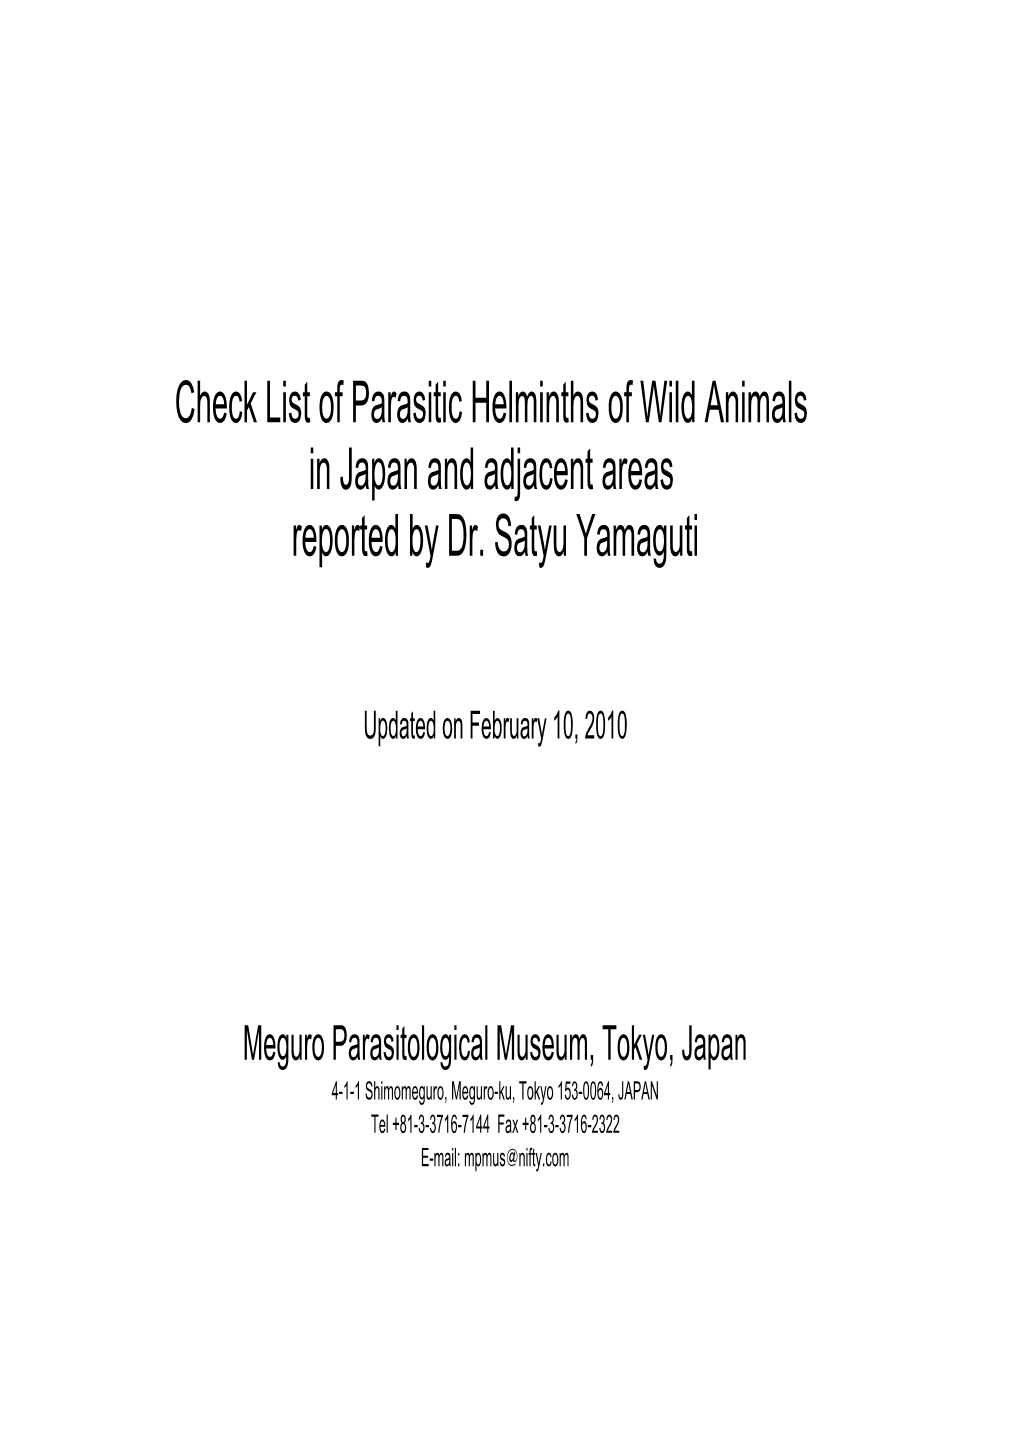 Check List of Parasitic Helminths of Wild Animals in Japan and Adjacent Areas Reported by Dr